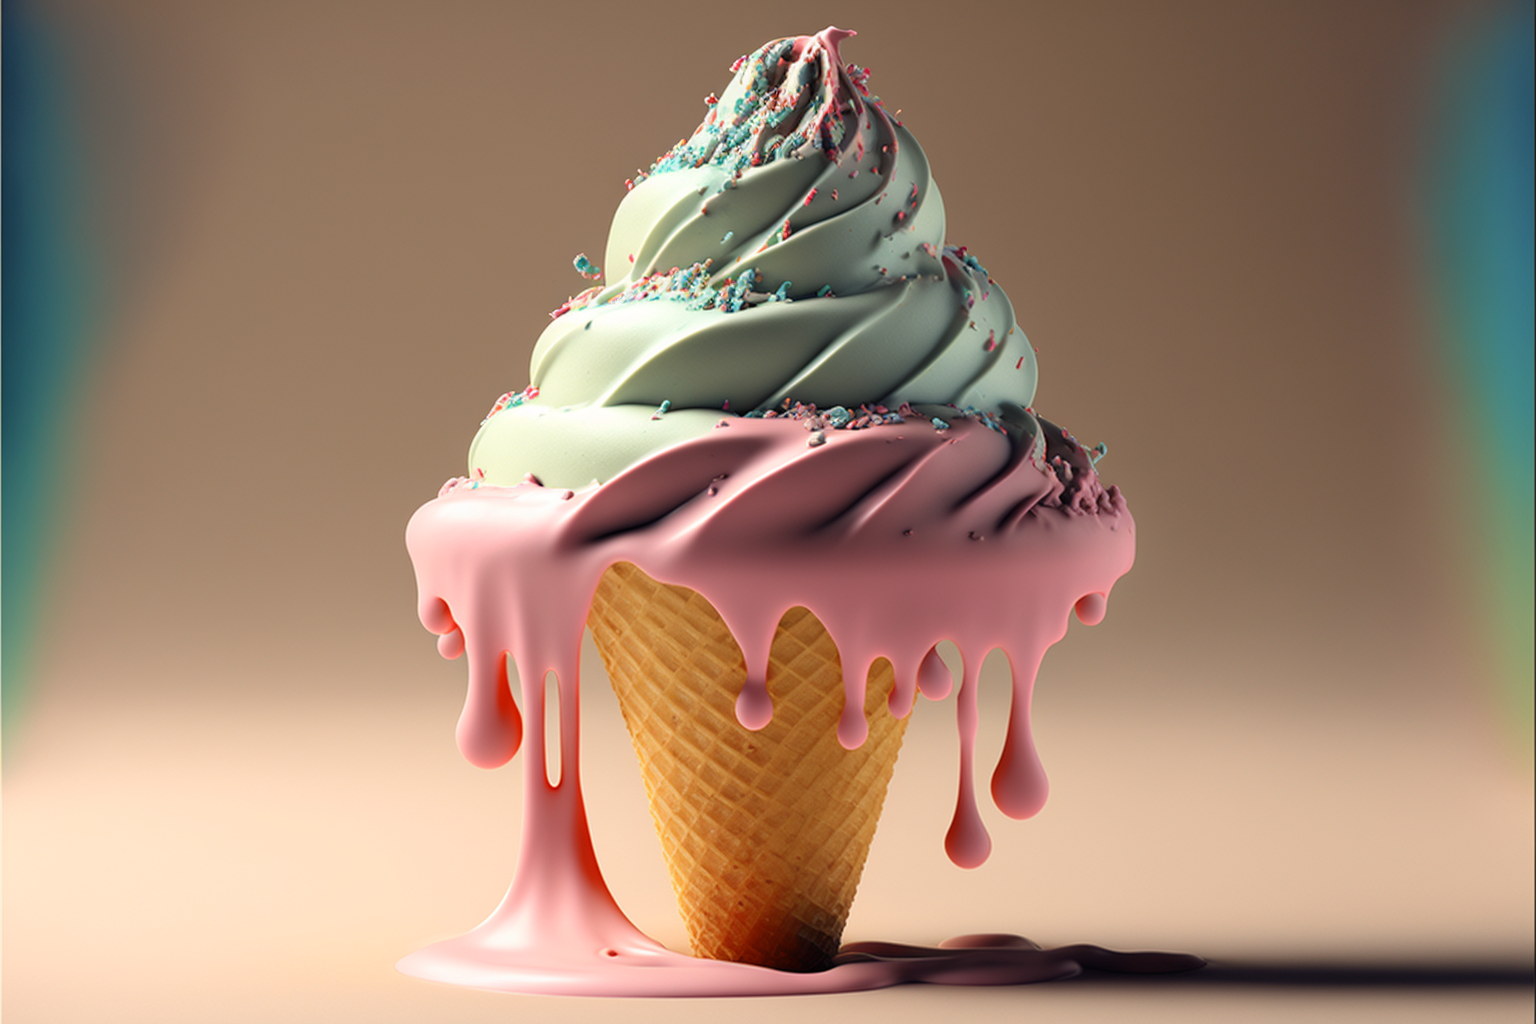 What Happens When Ice Cream Melts?